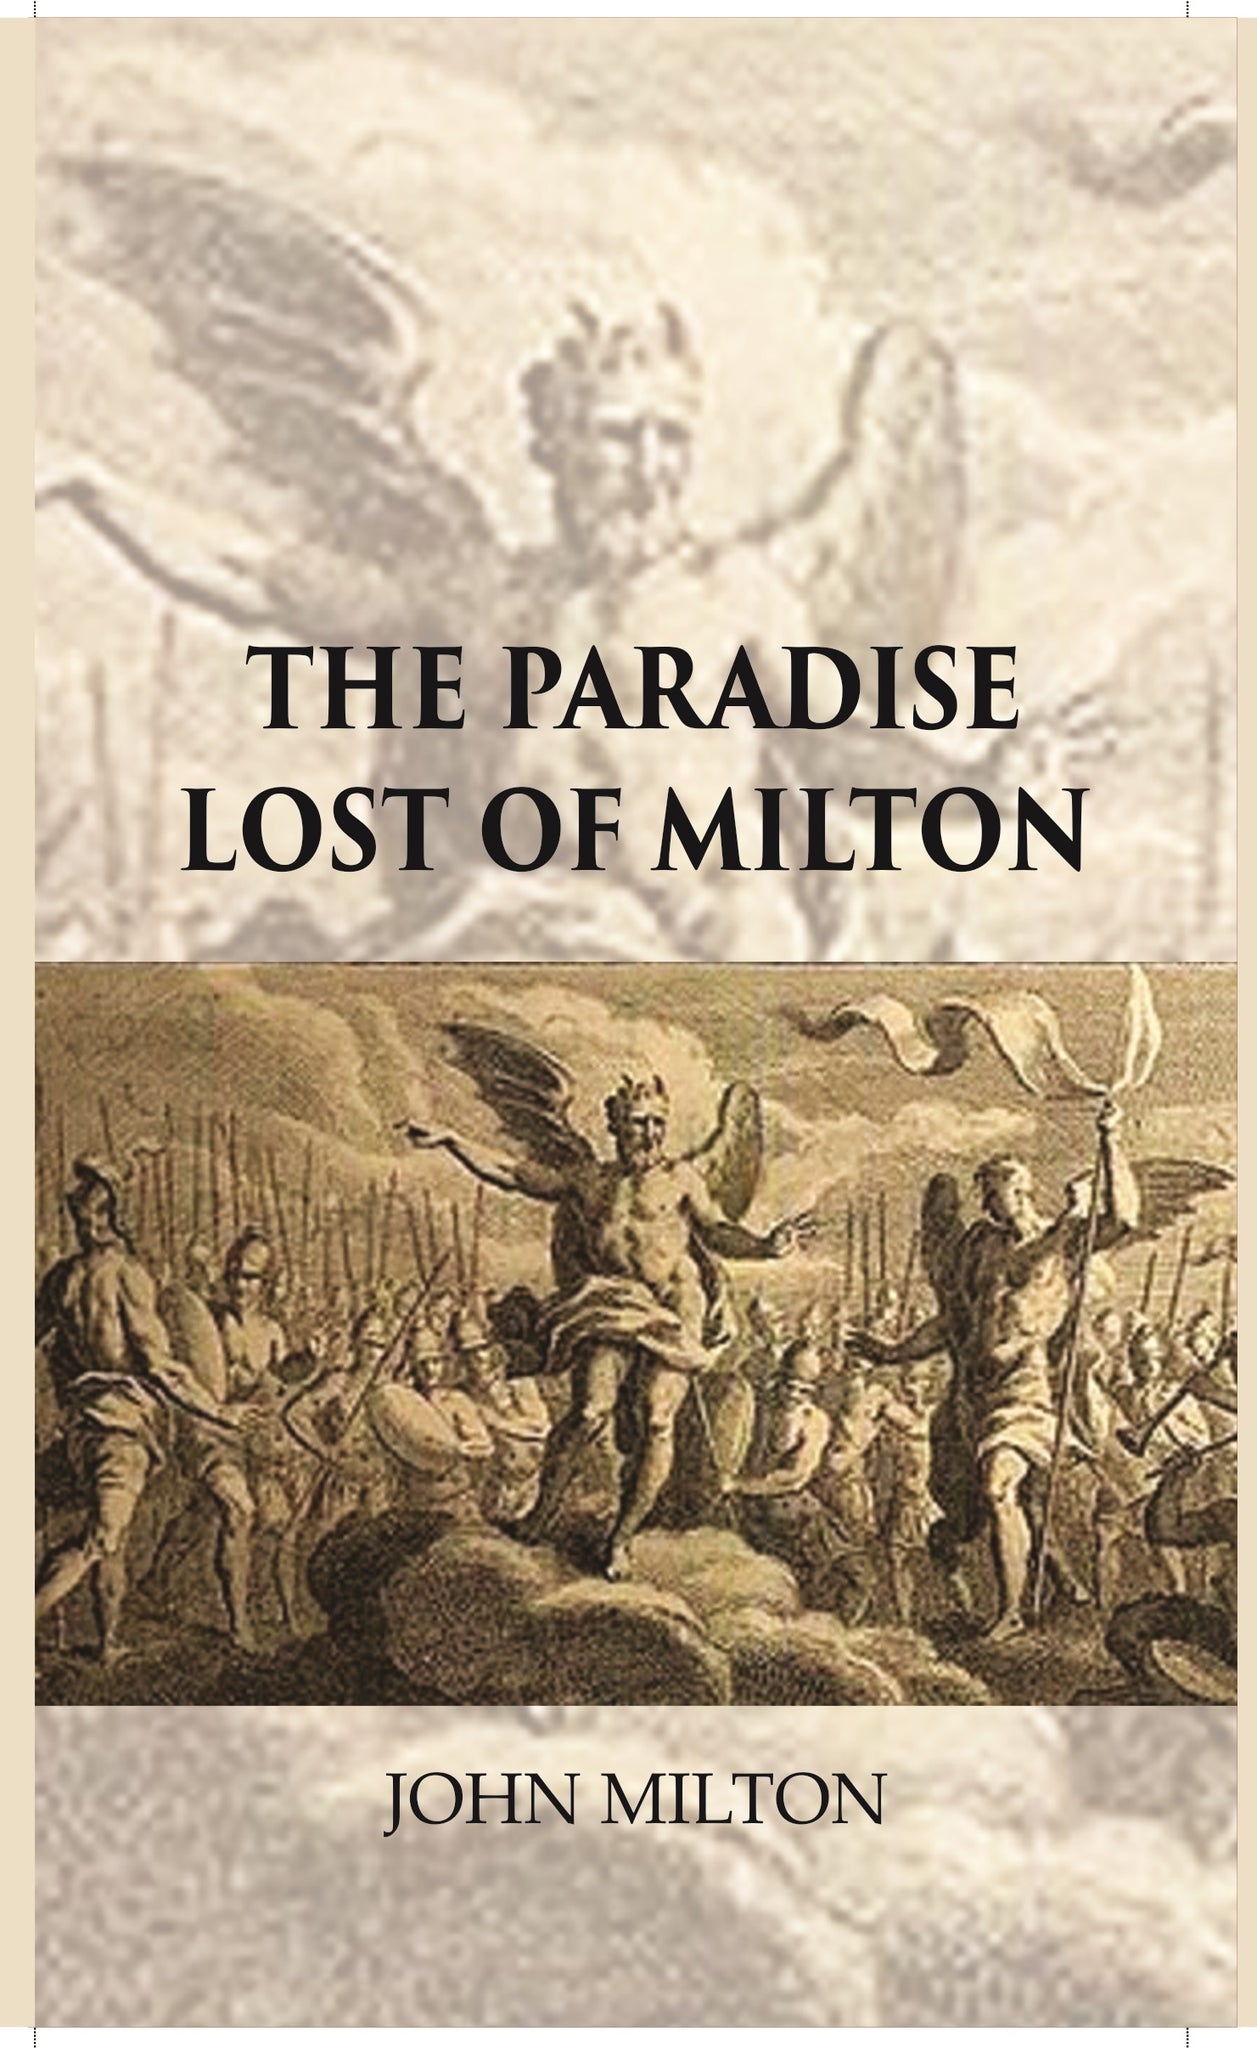 The Paradise Lost of Milton